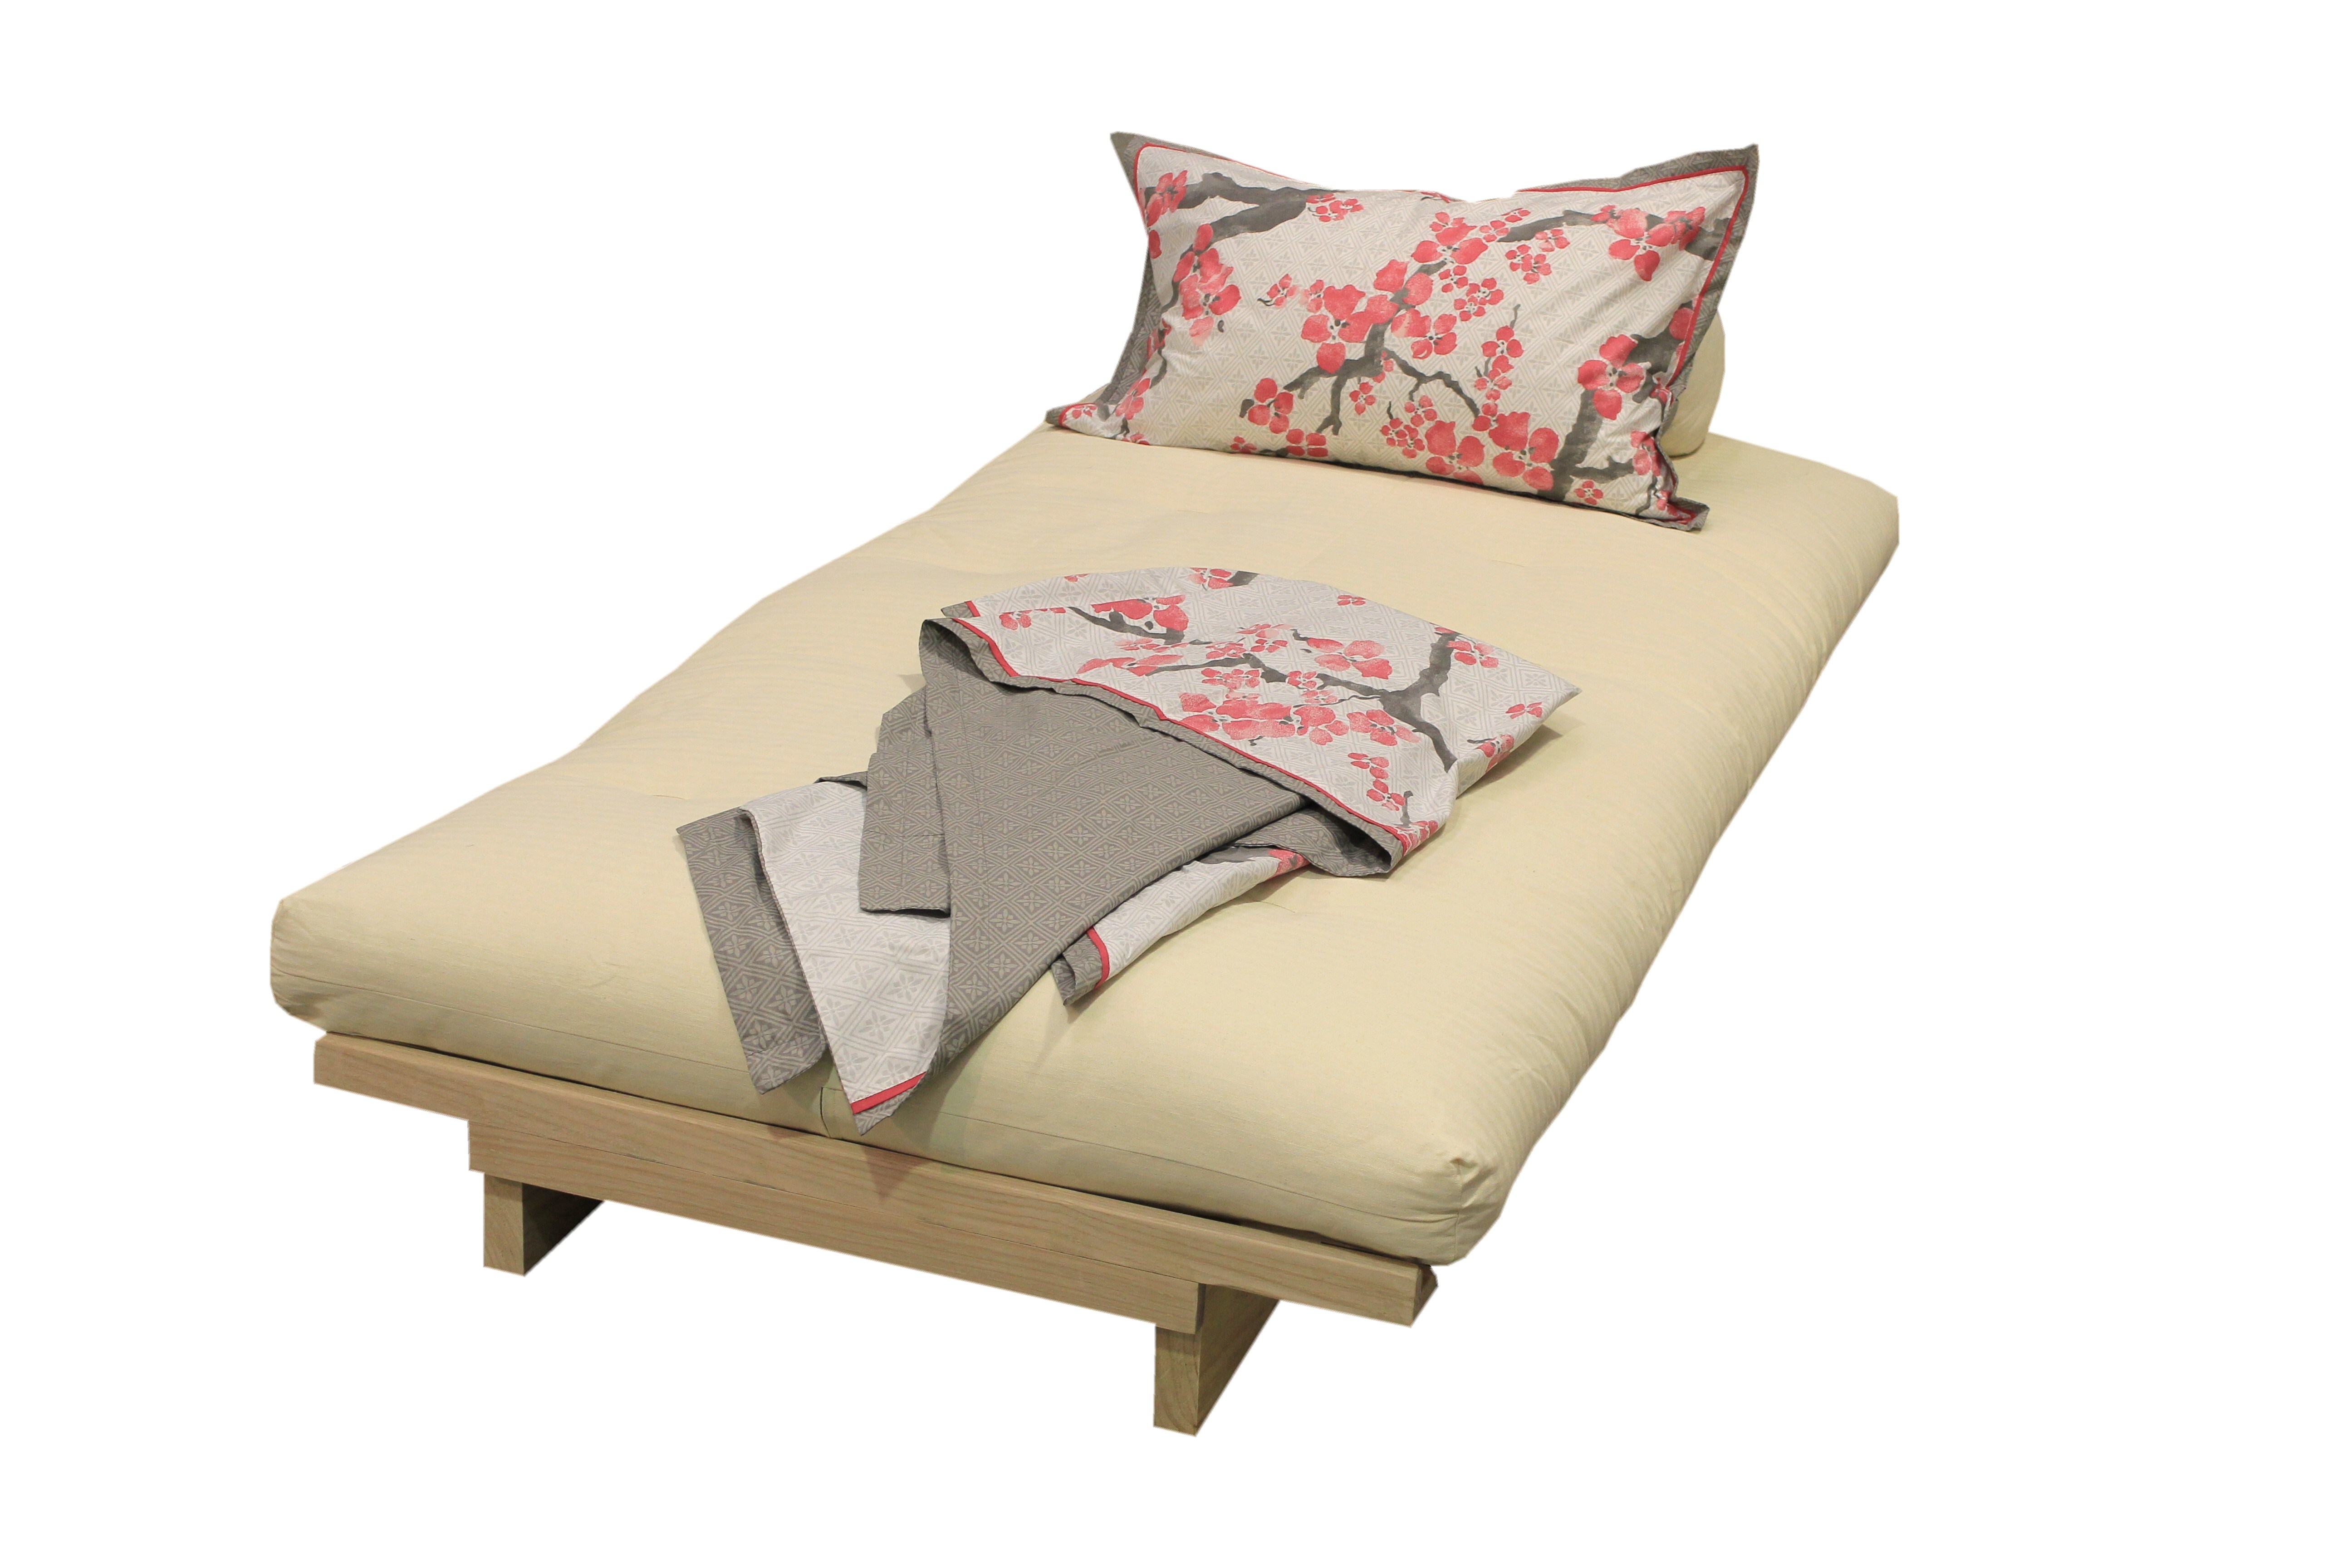 Governable Albany anker Oslo Futon Sofa Bed in bed position - angle - Back to Bed